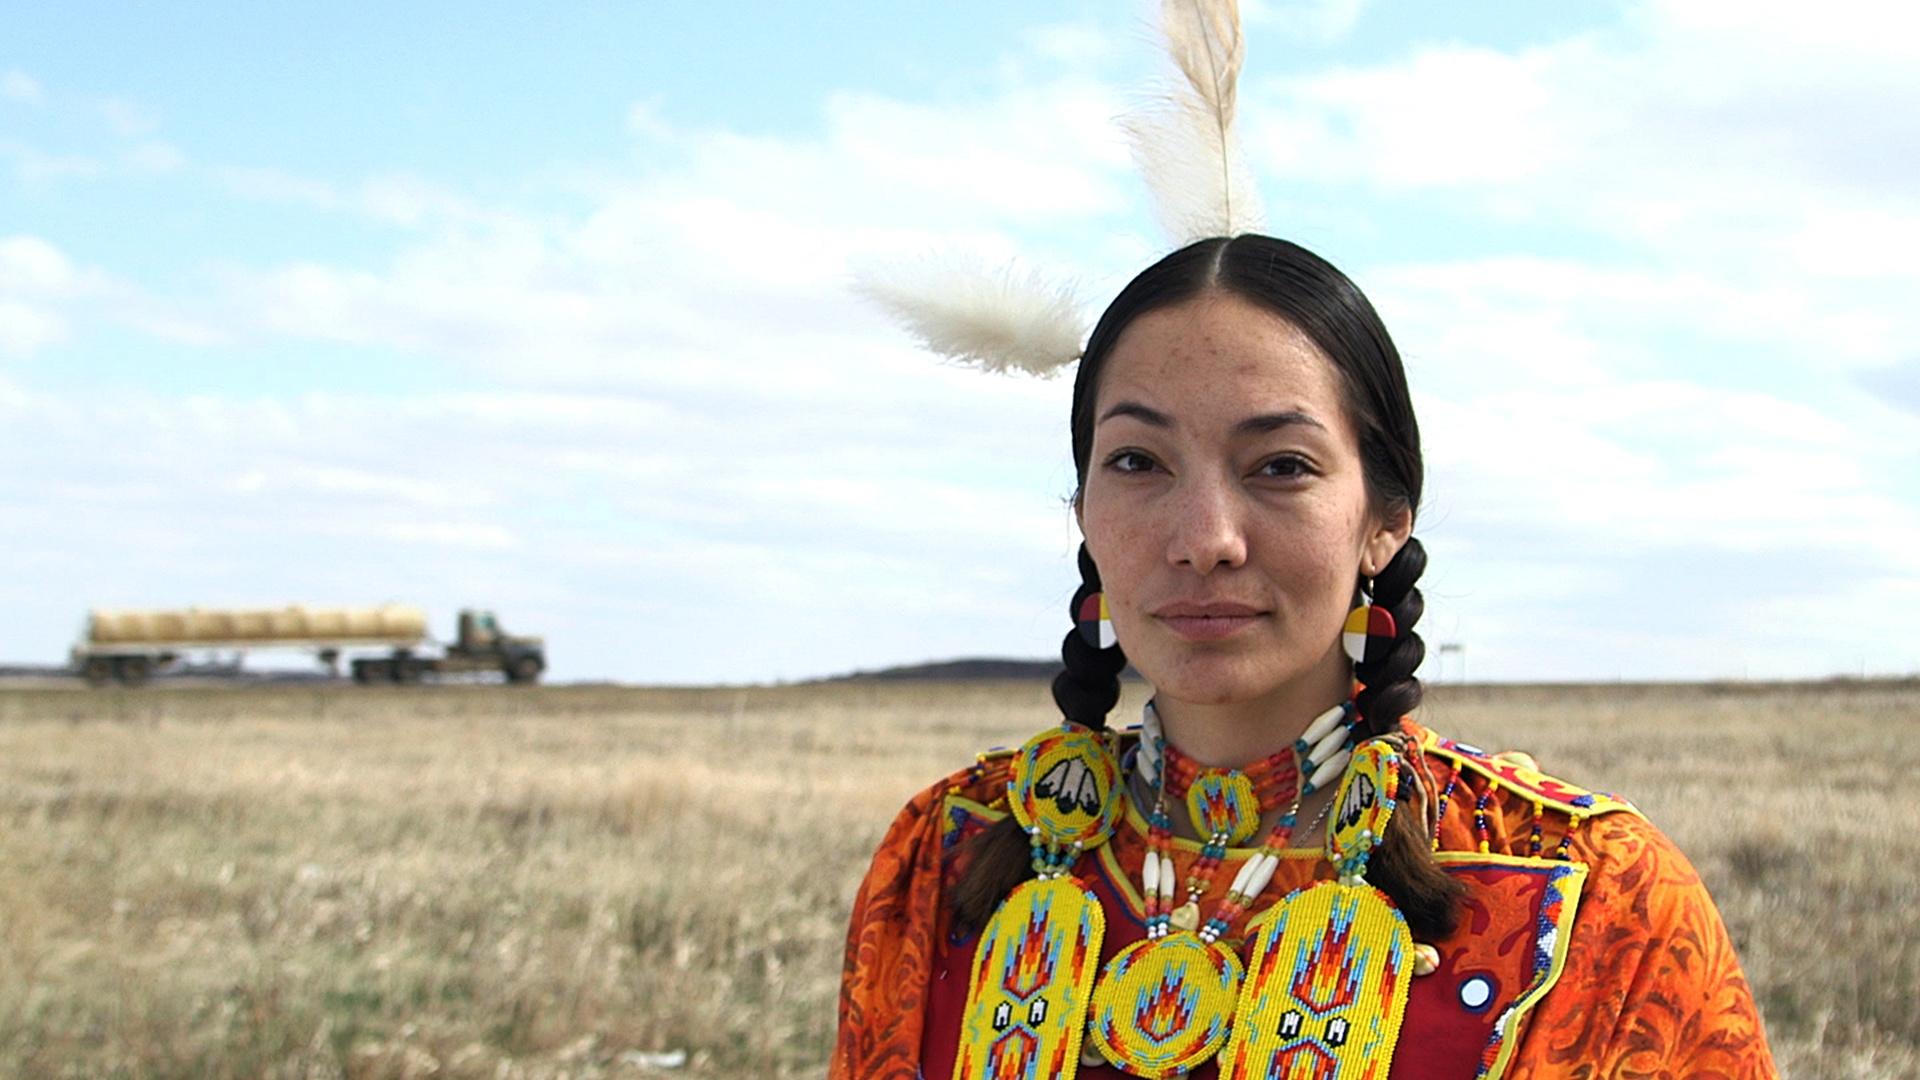 Wind River Movie Royalties Donated To Native Women's Group